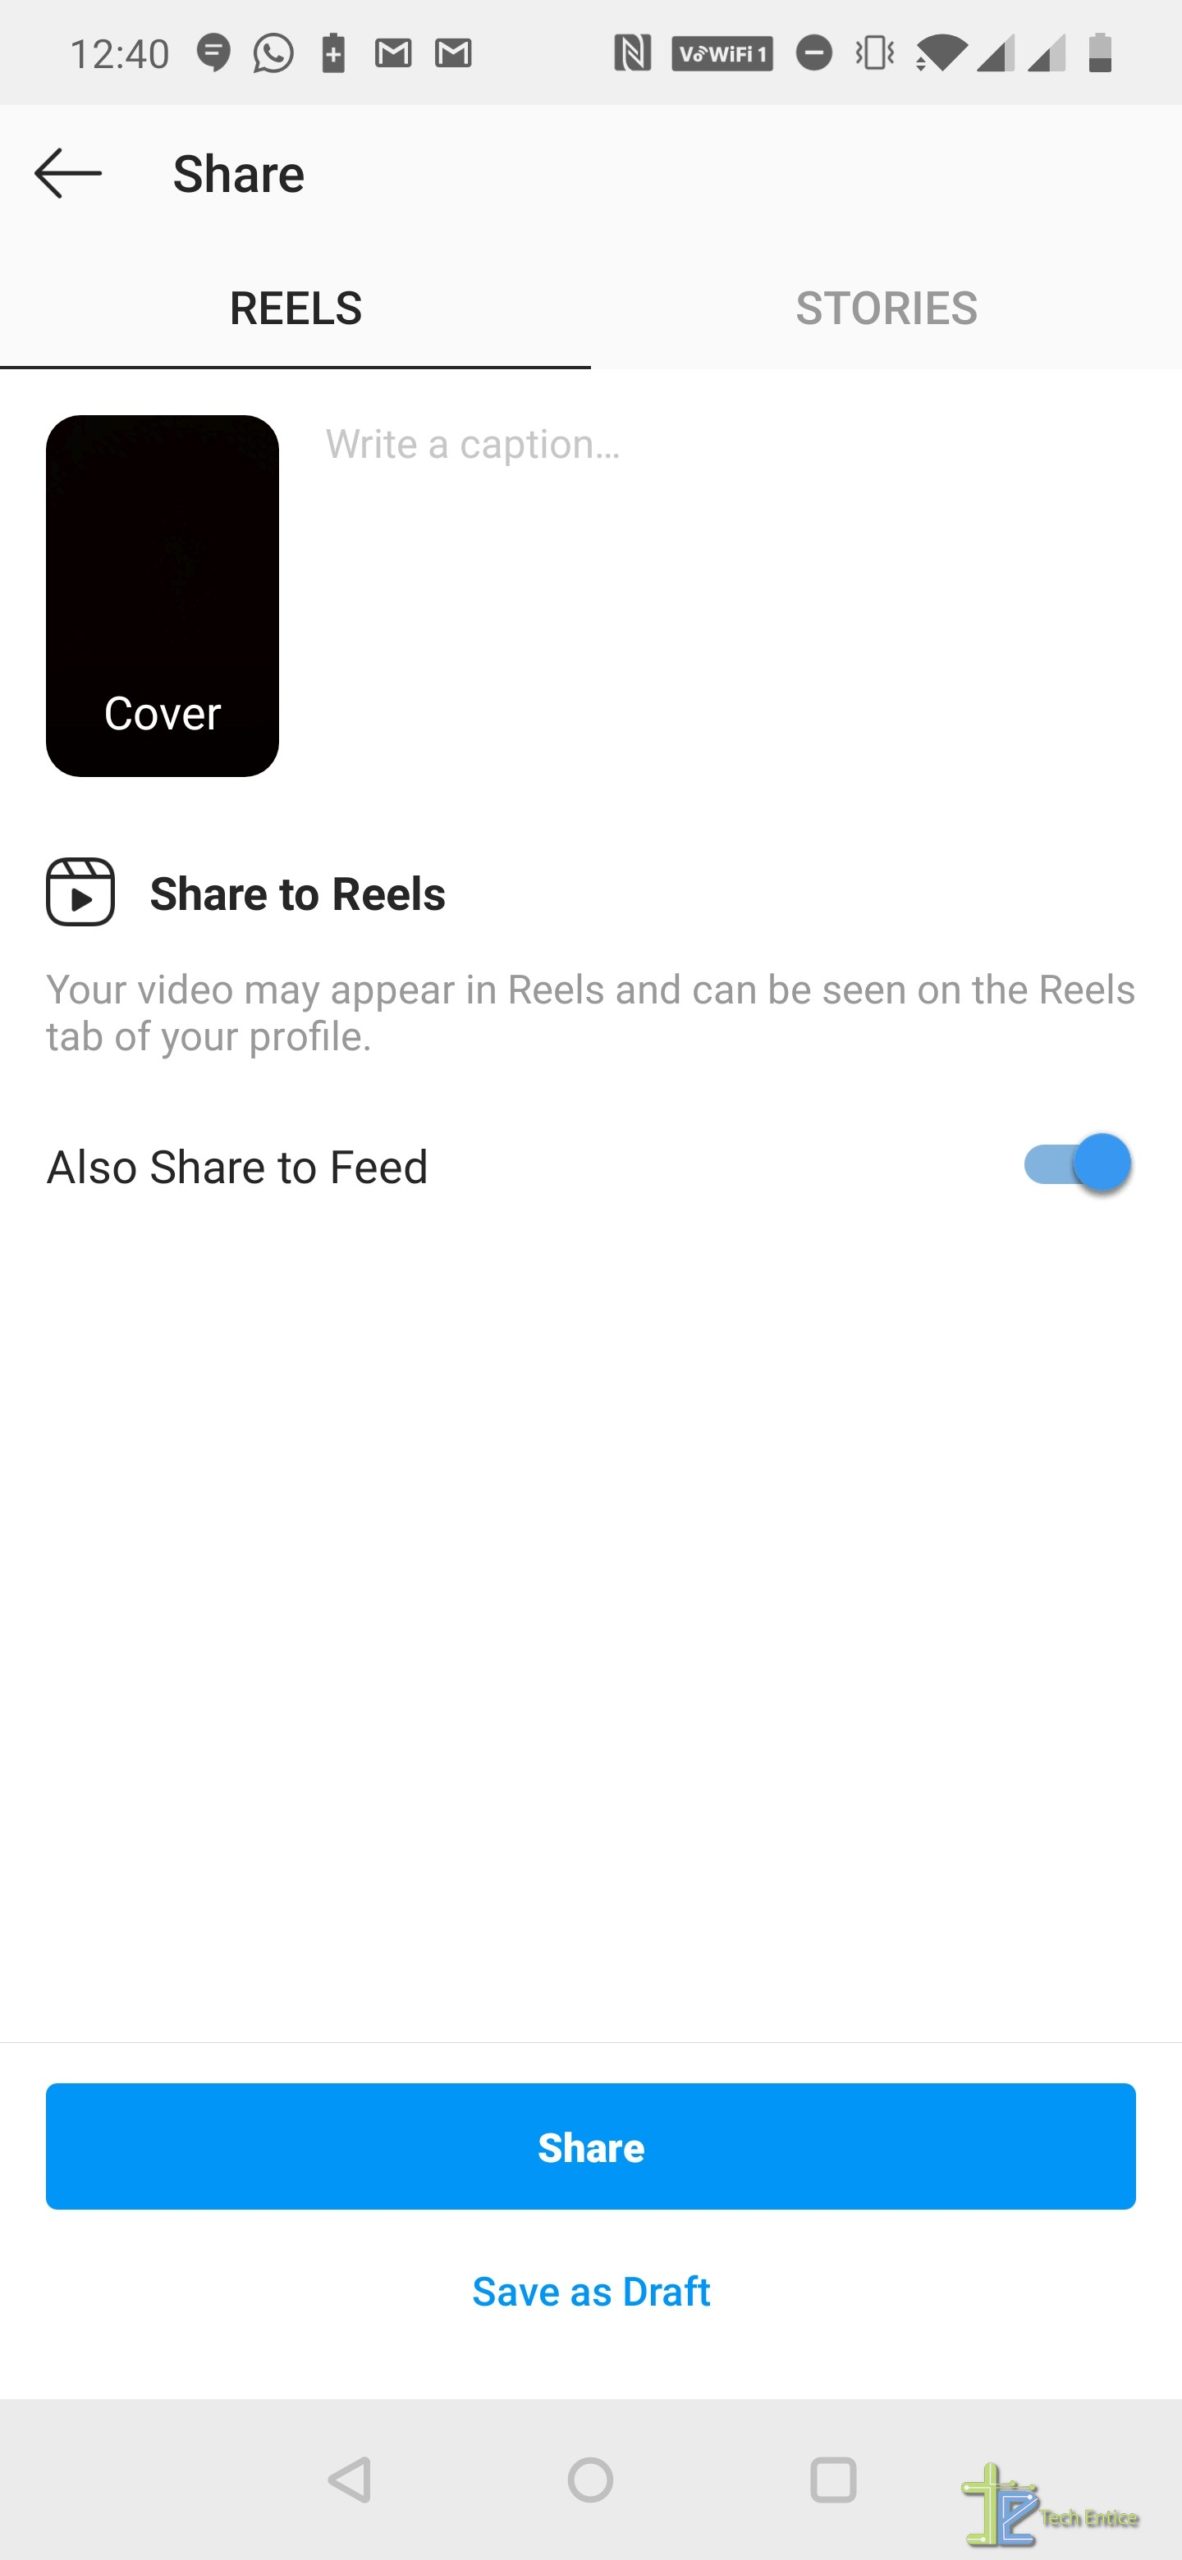 How To Create Short Videos With Instagram Reels?